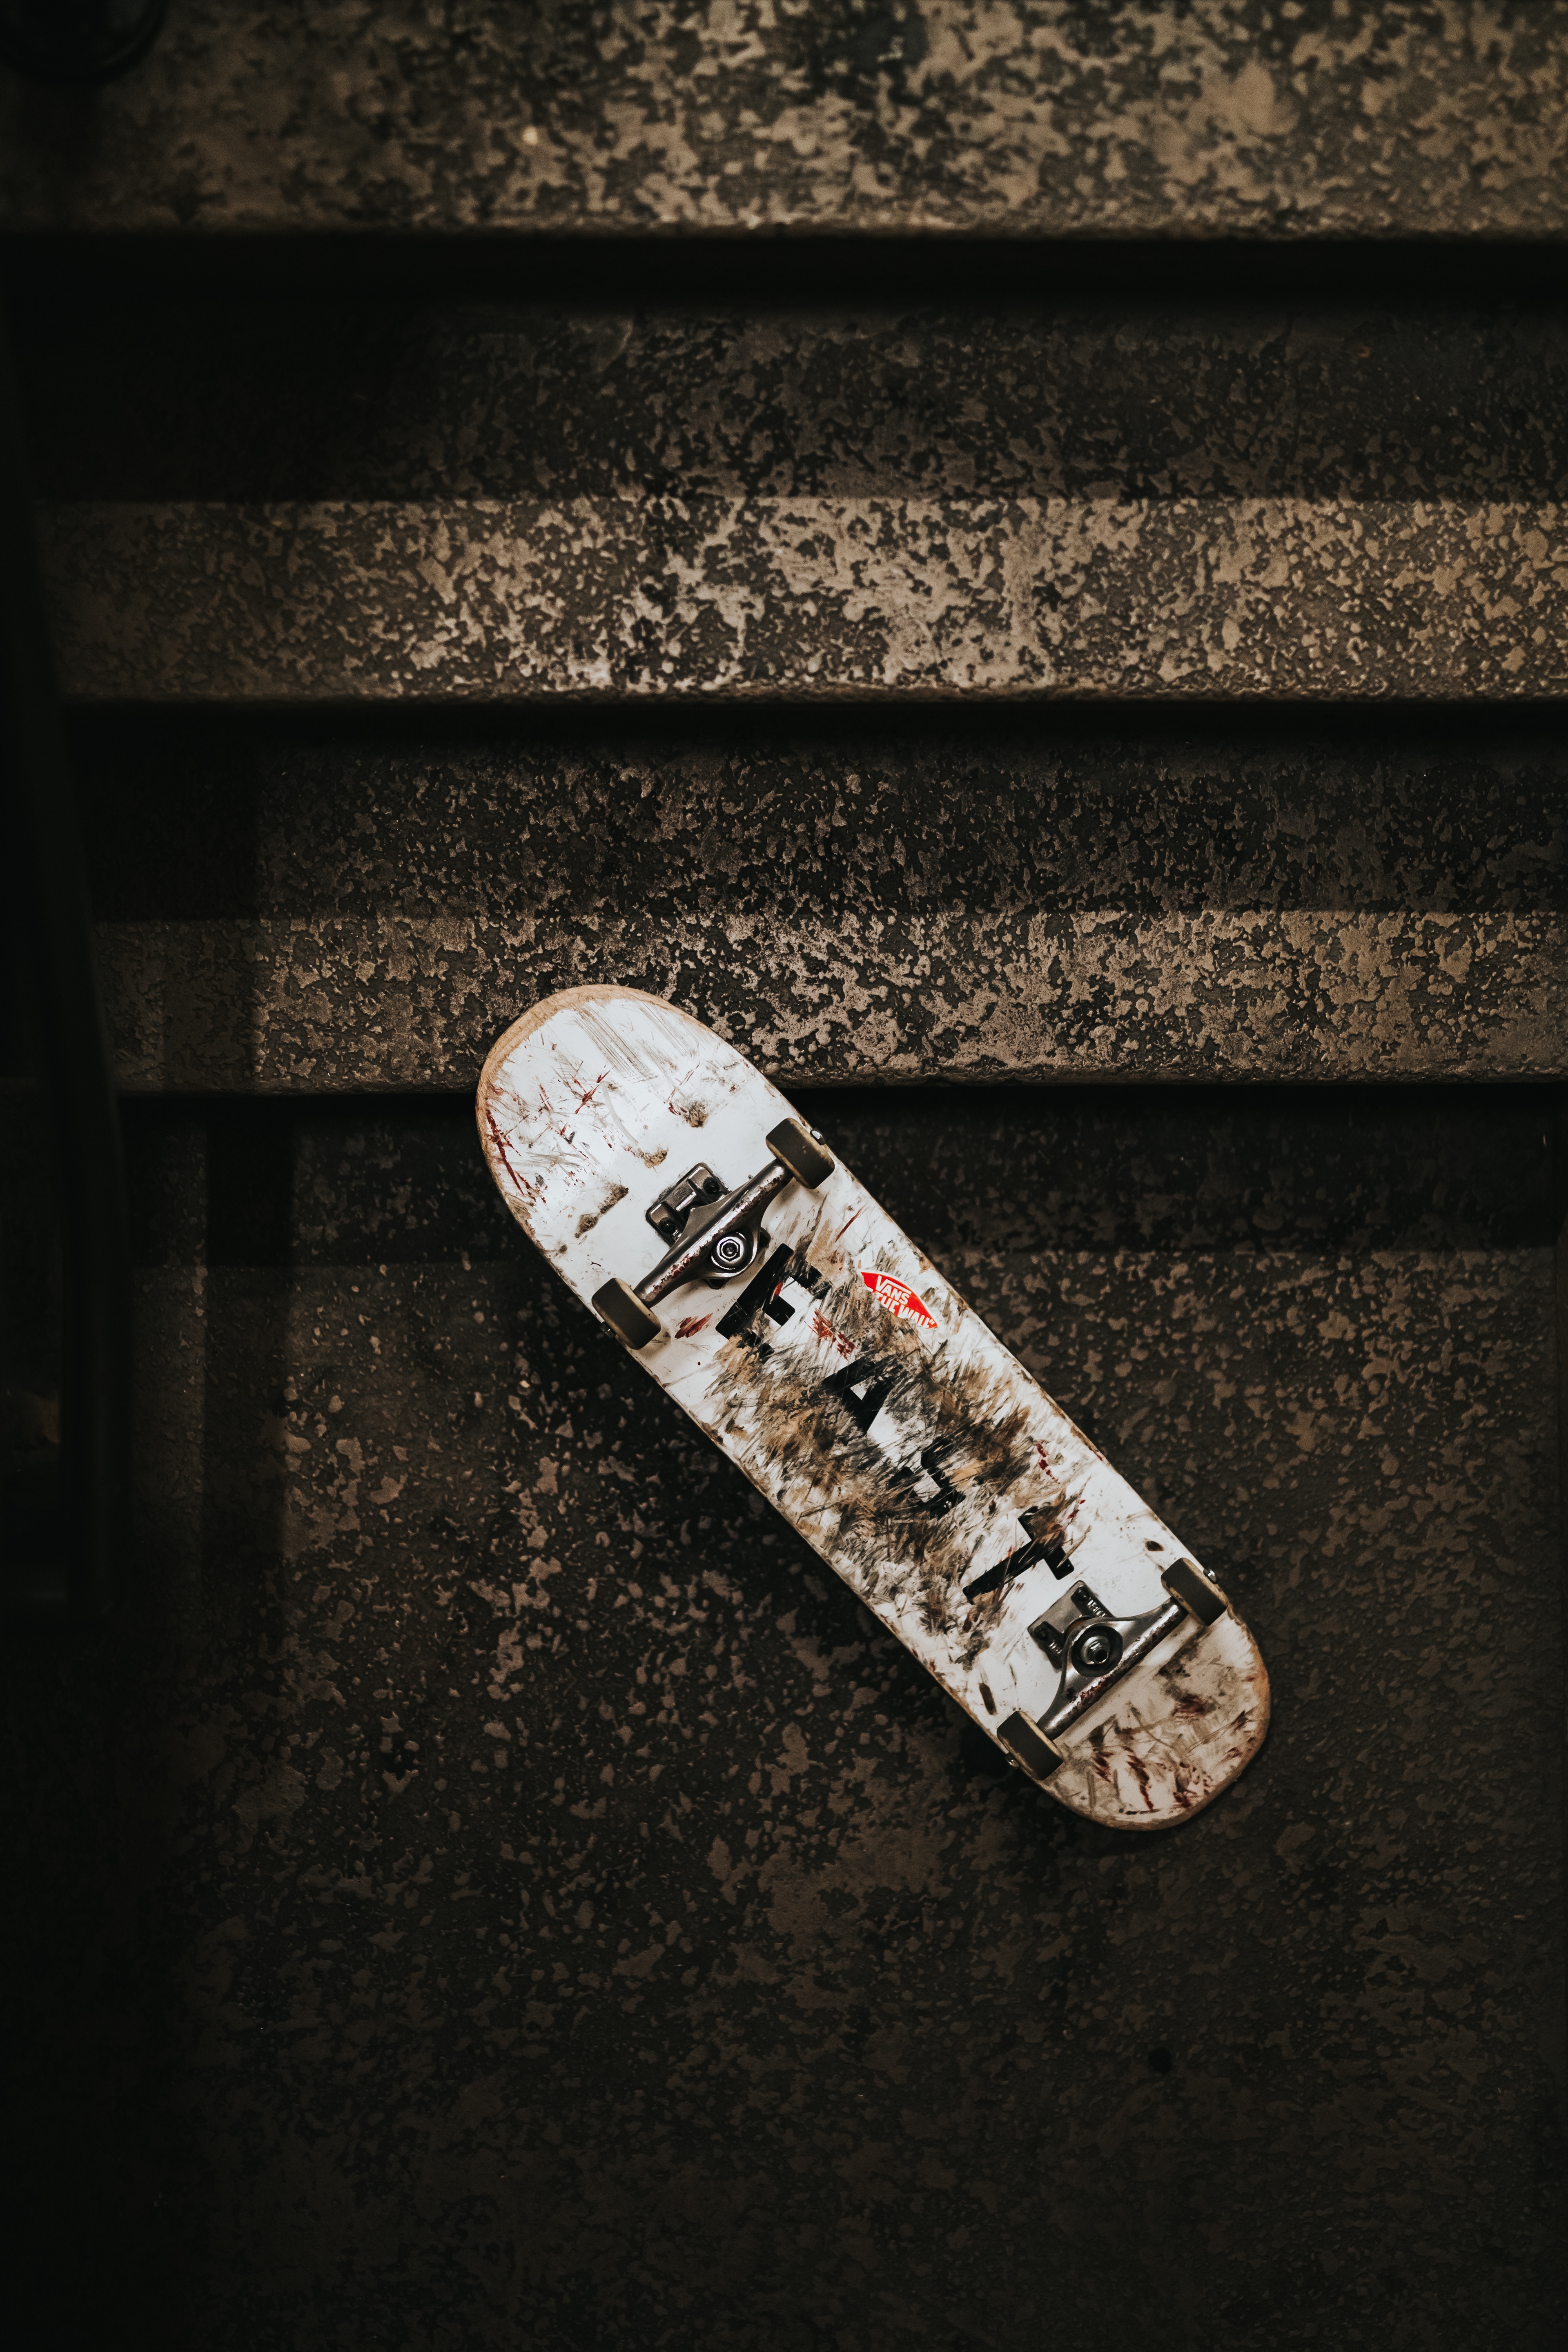 sports, lost, stairs, ladder, shabby, skateboard, wheels, dirty cellphone